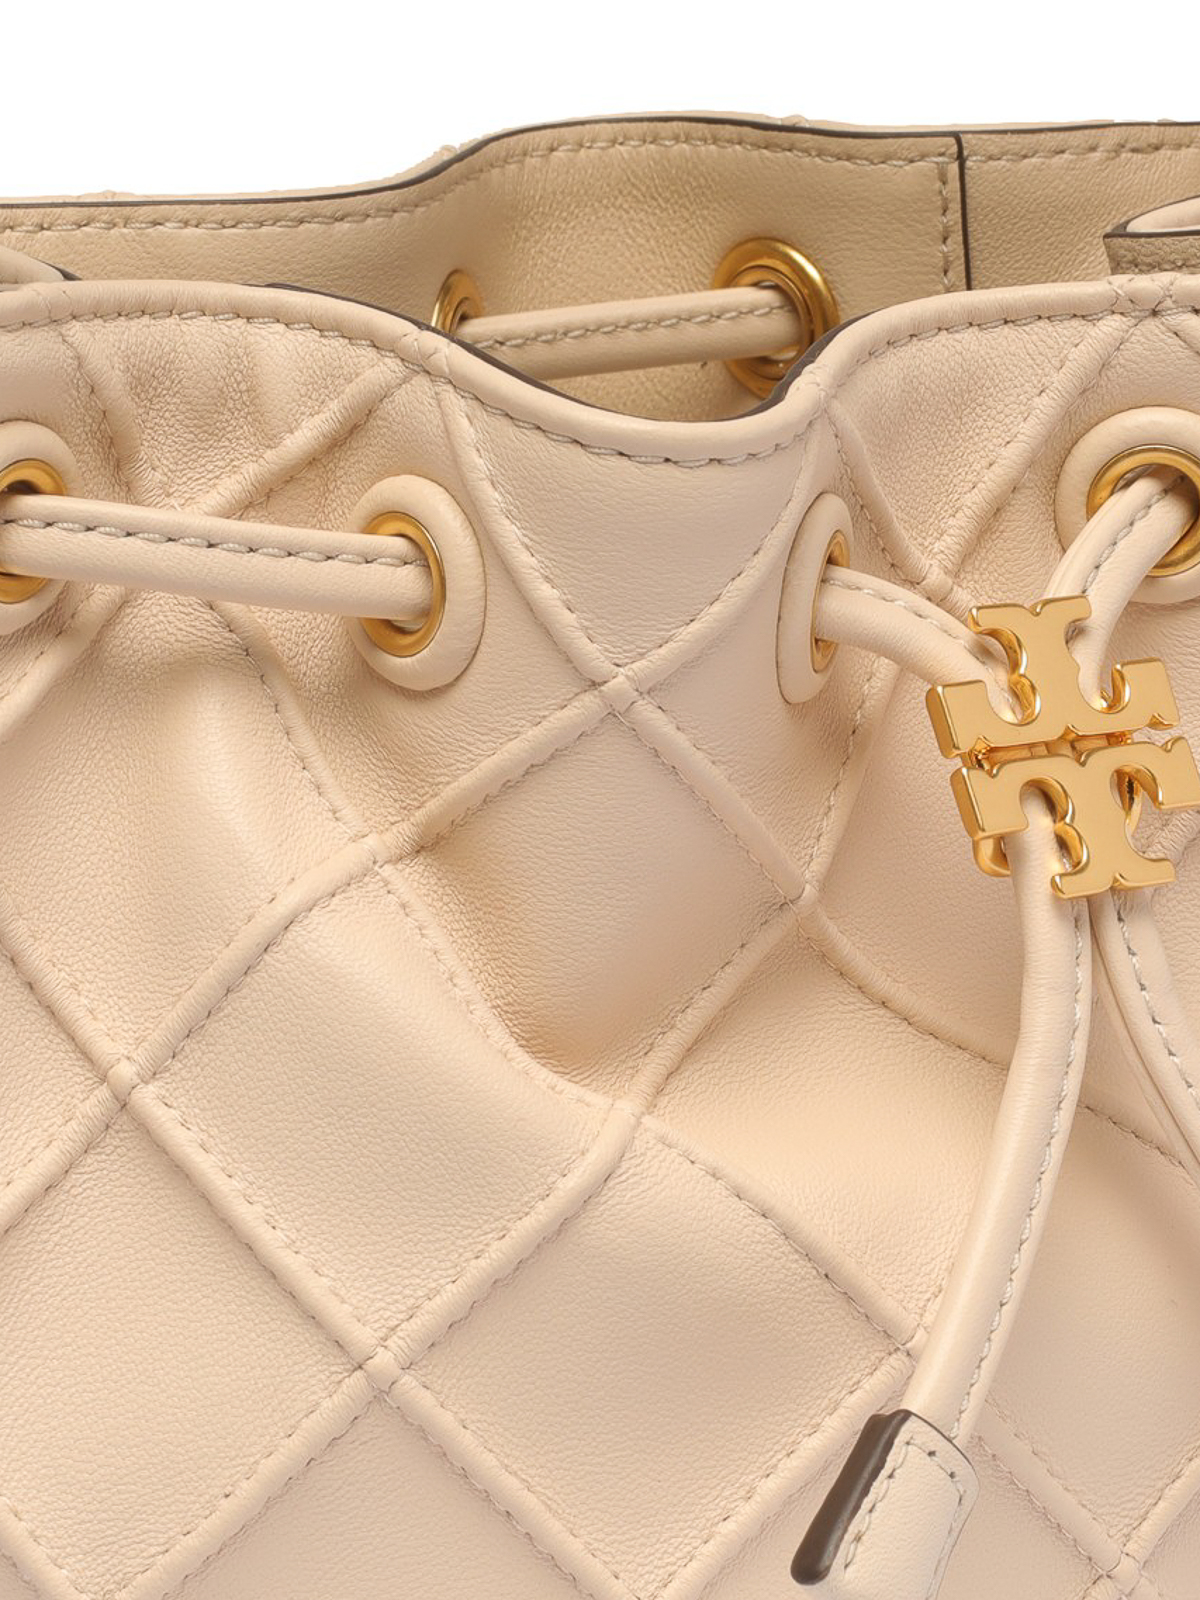 Bucket bags Tory Burch - Leather bag - 142565122